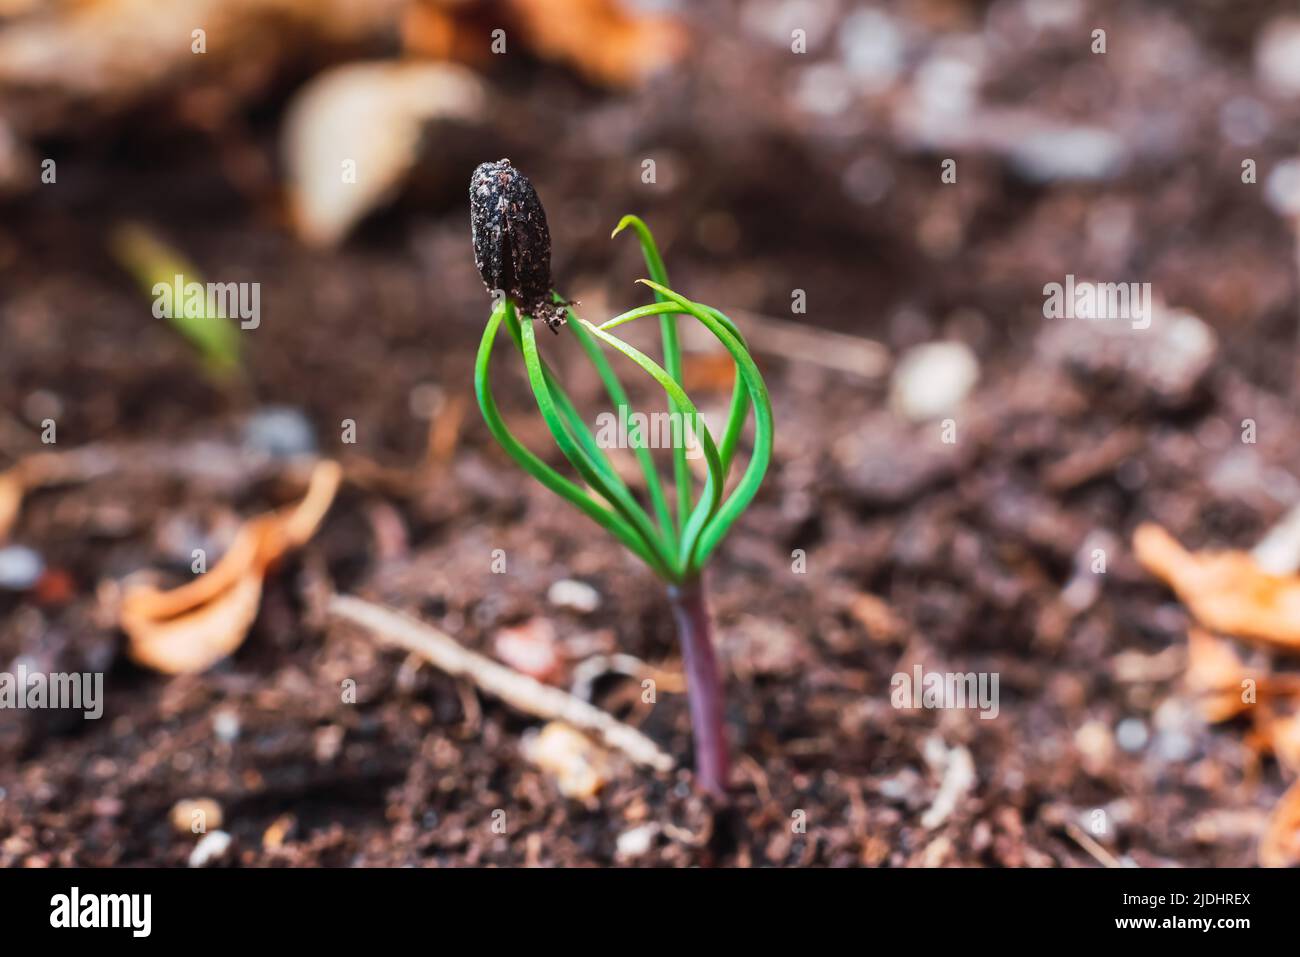 The pine seed has germinated and sprouts from its shell in the ground. Stock Photo